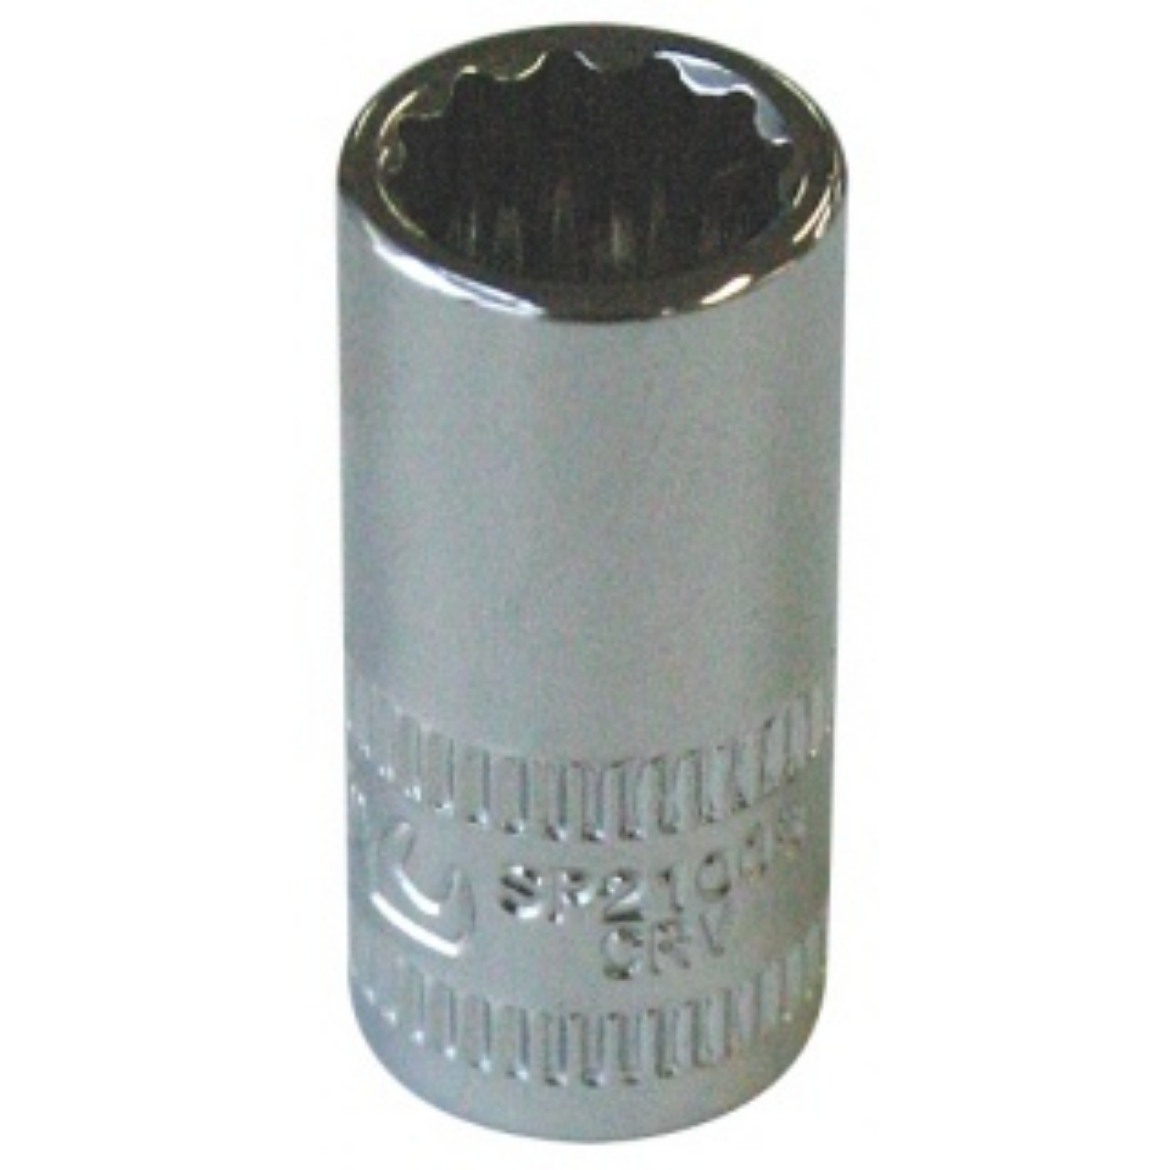 Picture of SOCKET 1/4"DR 12 PT SAE 9/32" SP TOOLS